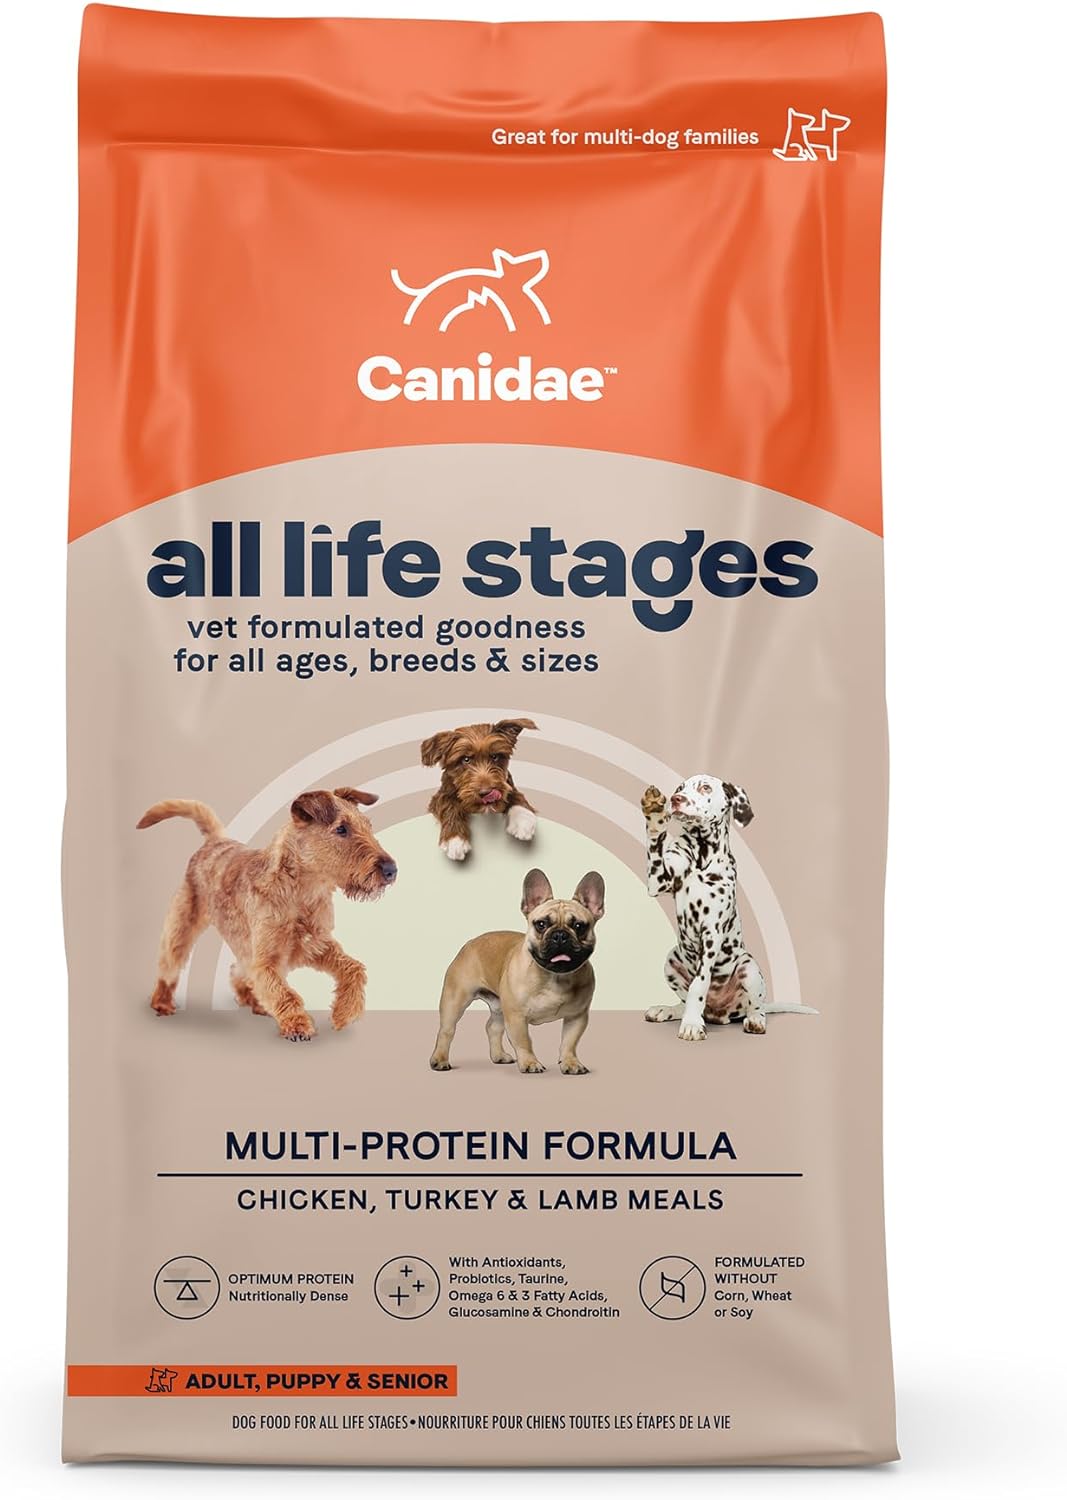 Canidae All Life Stages Premium Dry Dog Food for All Breeds, All Ages, Multi- Protein with Chicken, Turkey & Lamb Meals Recipe, 5 lbs. : Pet Supplies